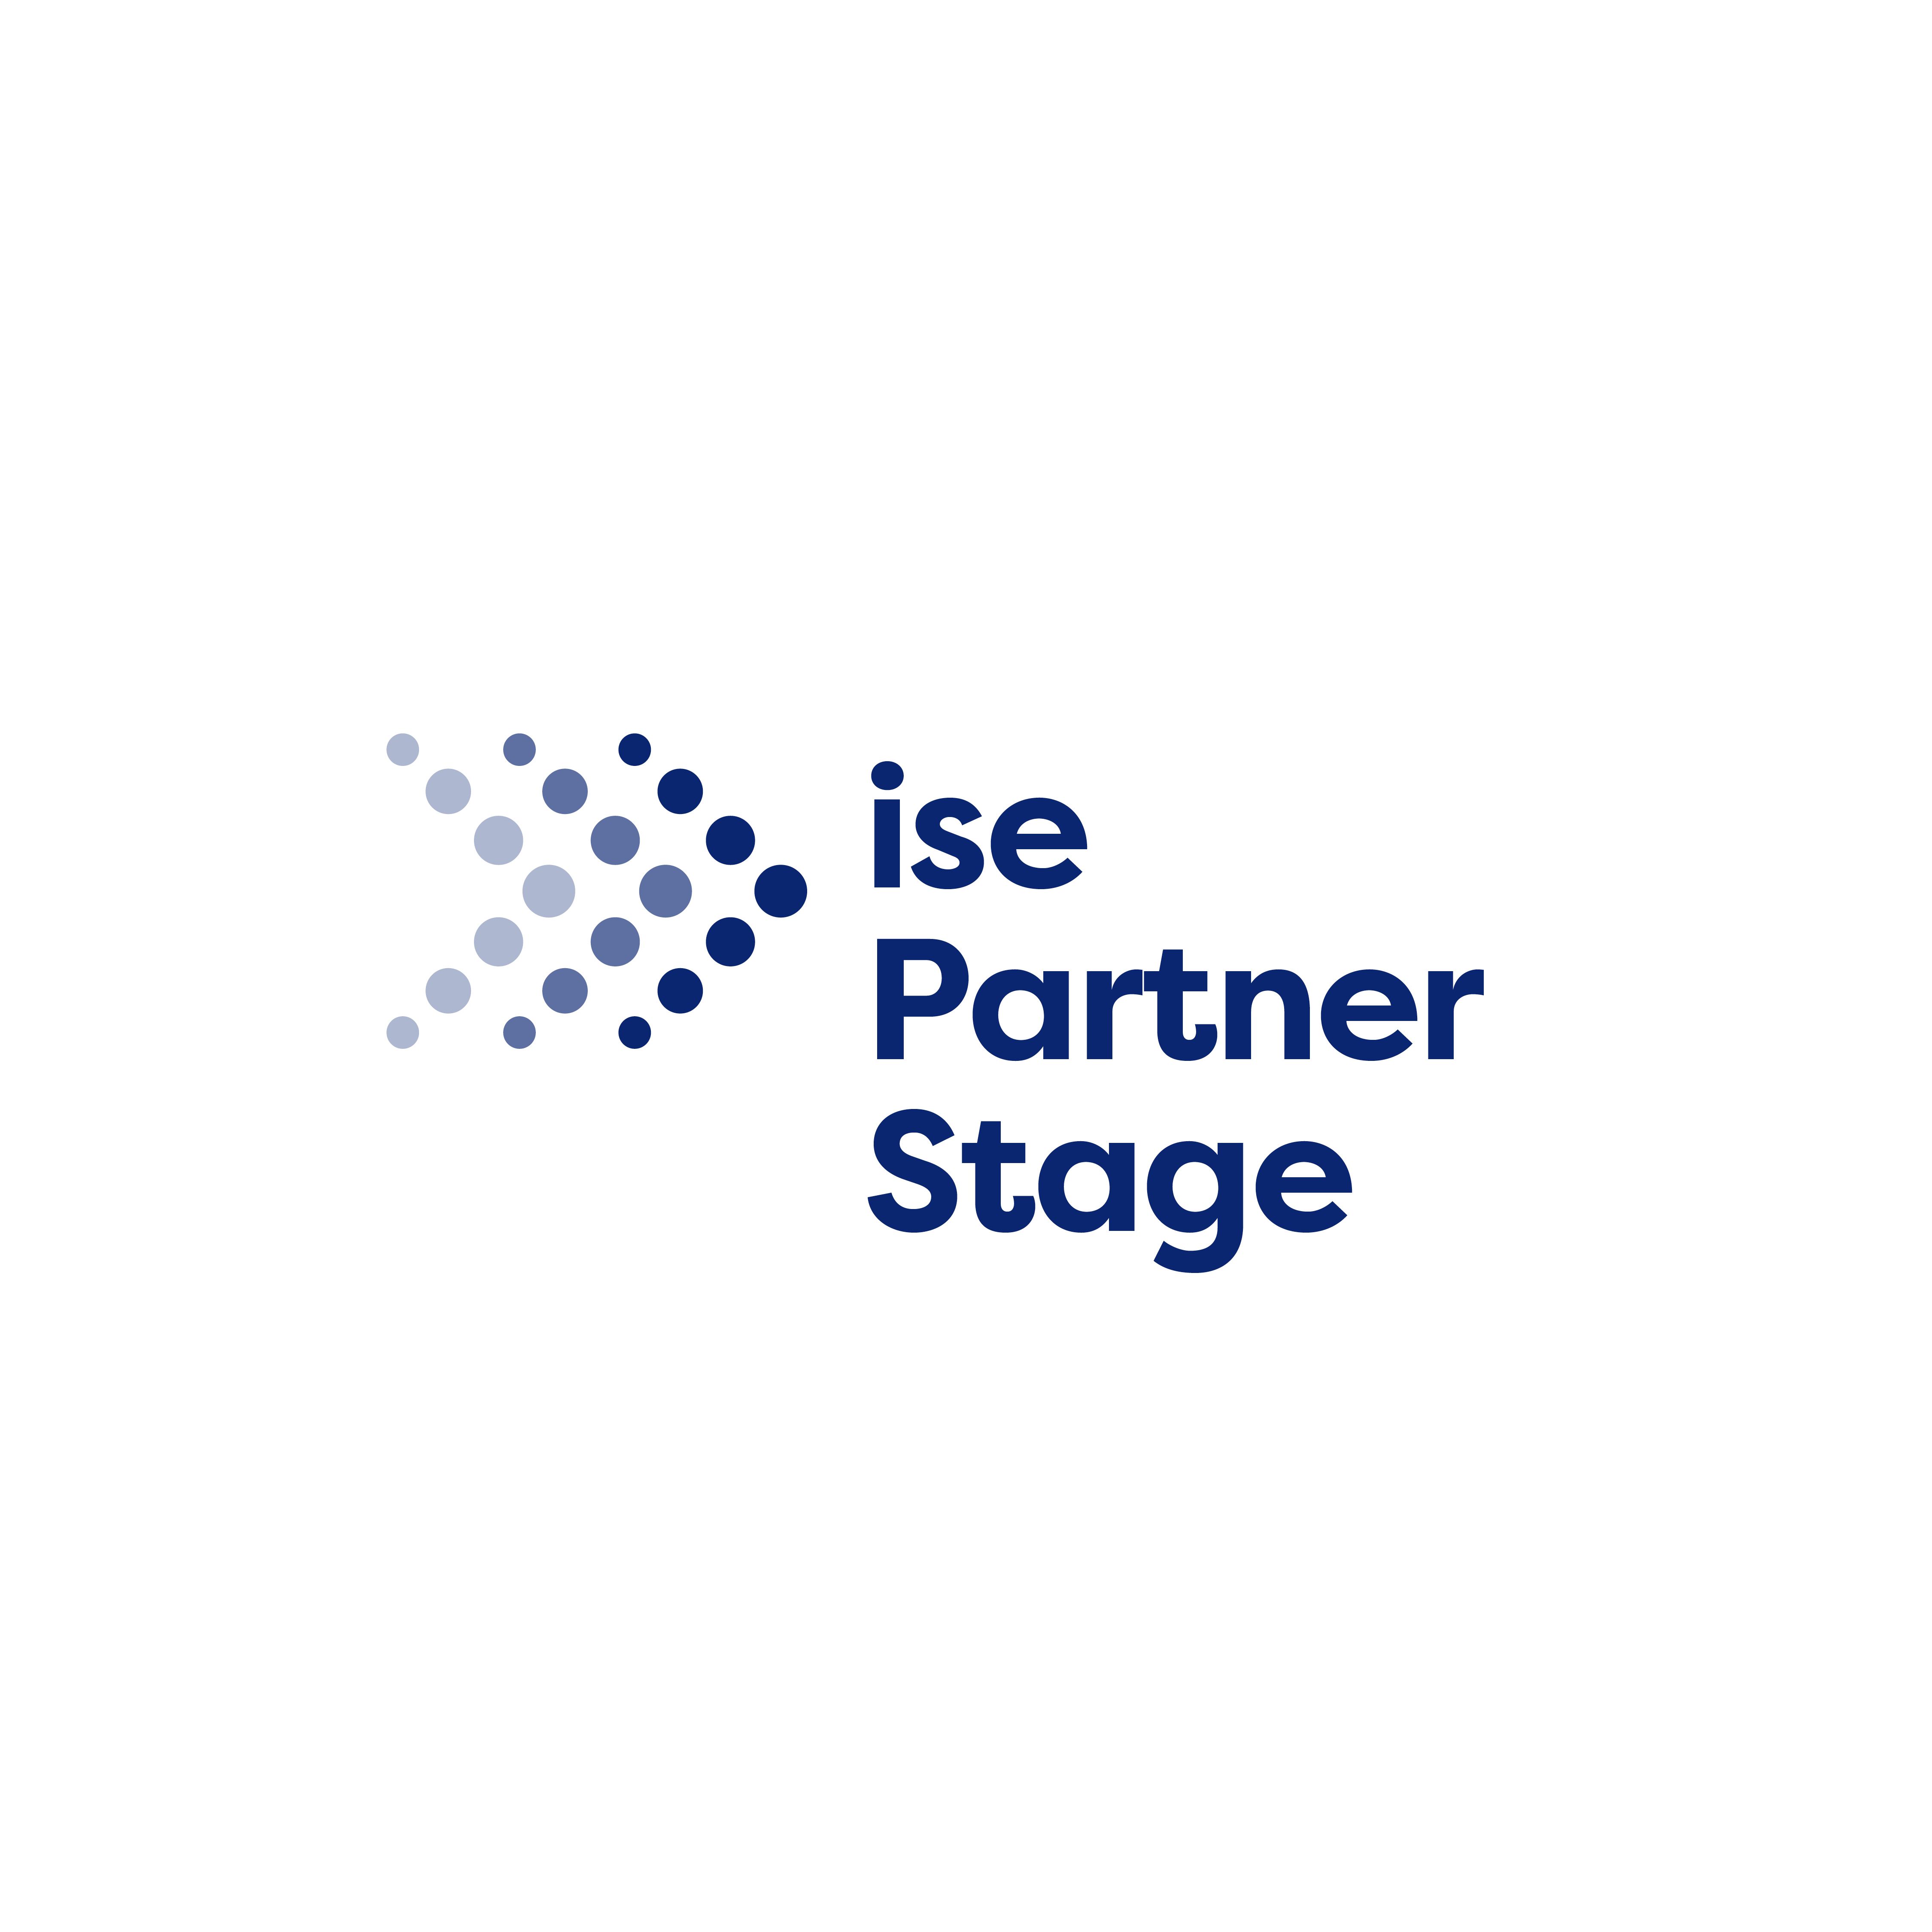 ISE Partner Stage